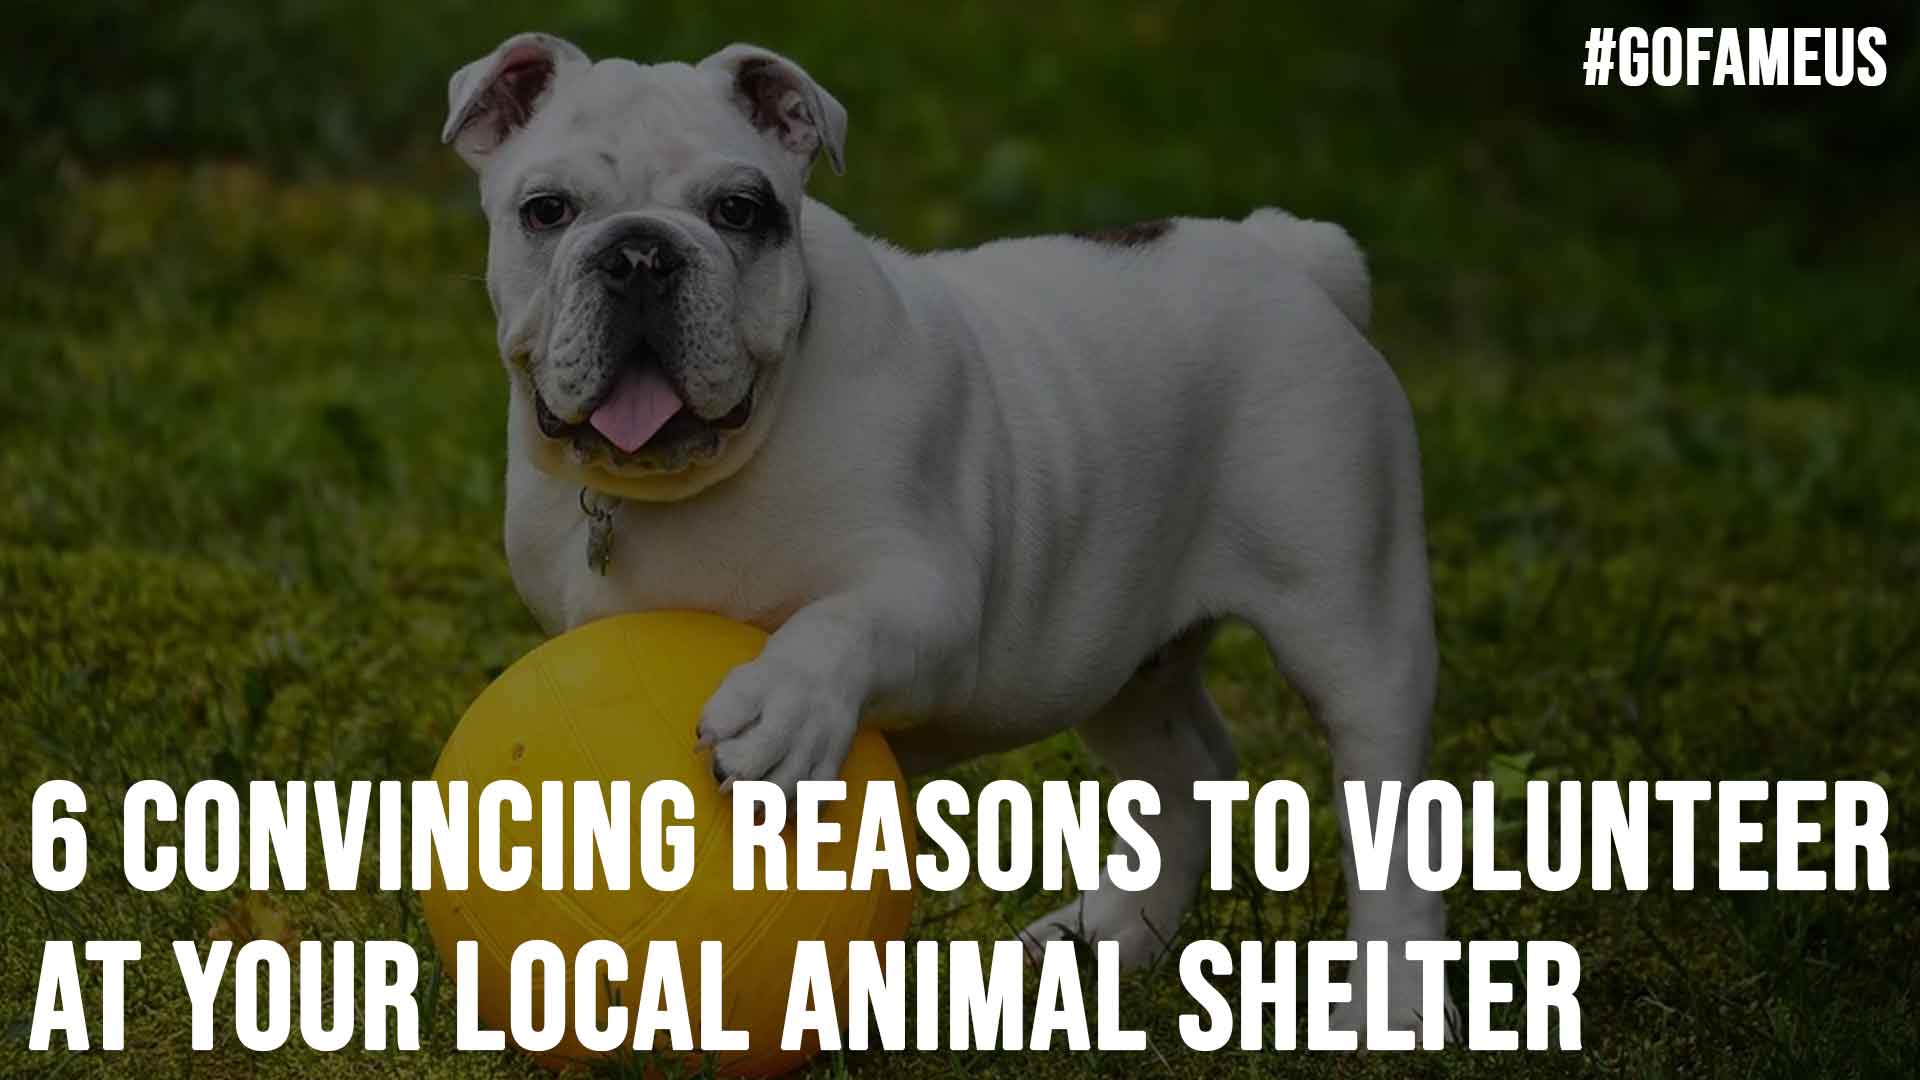 6 Convincing Reasons To Volunteer at Your Local Animal Shelter